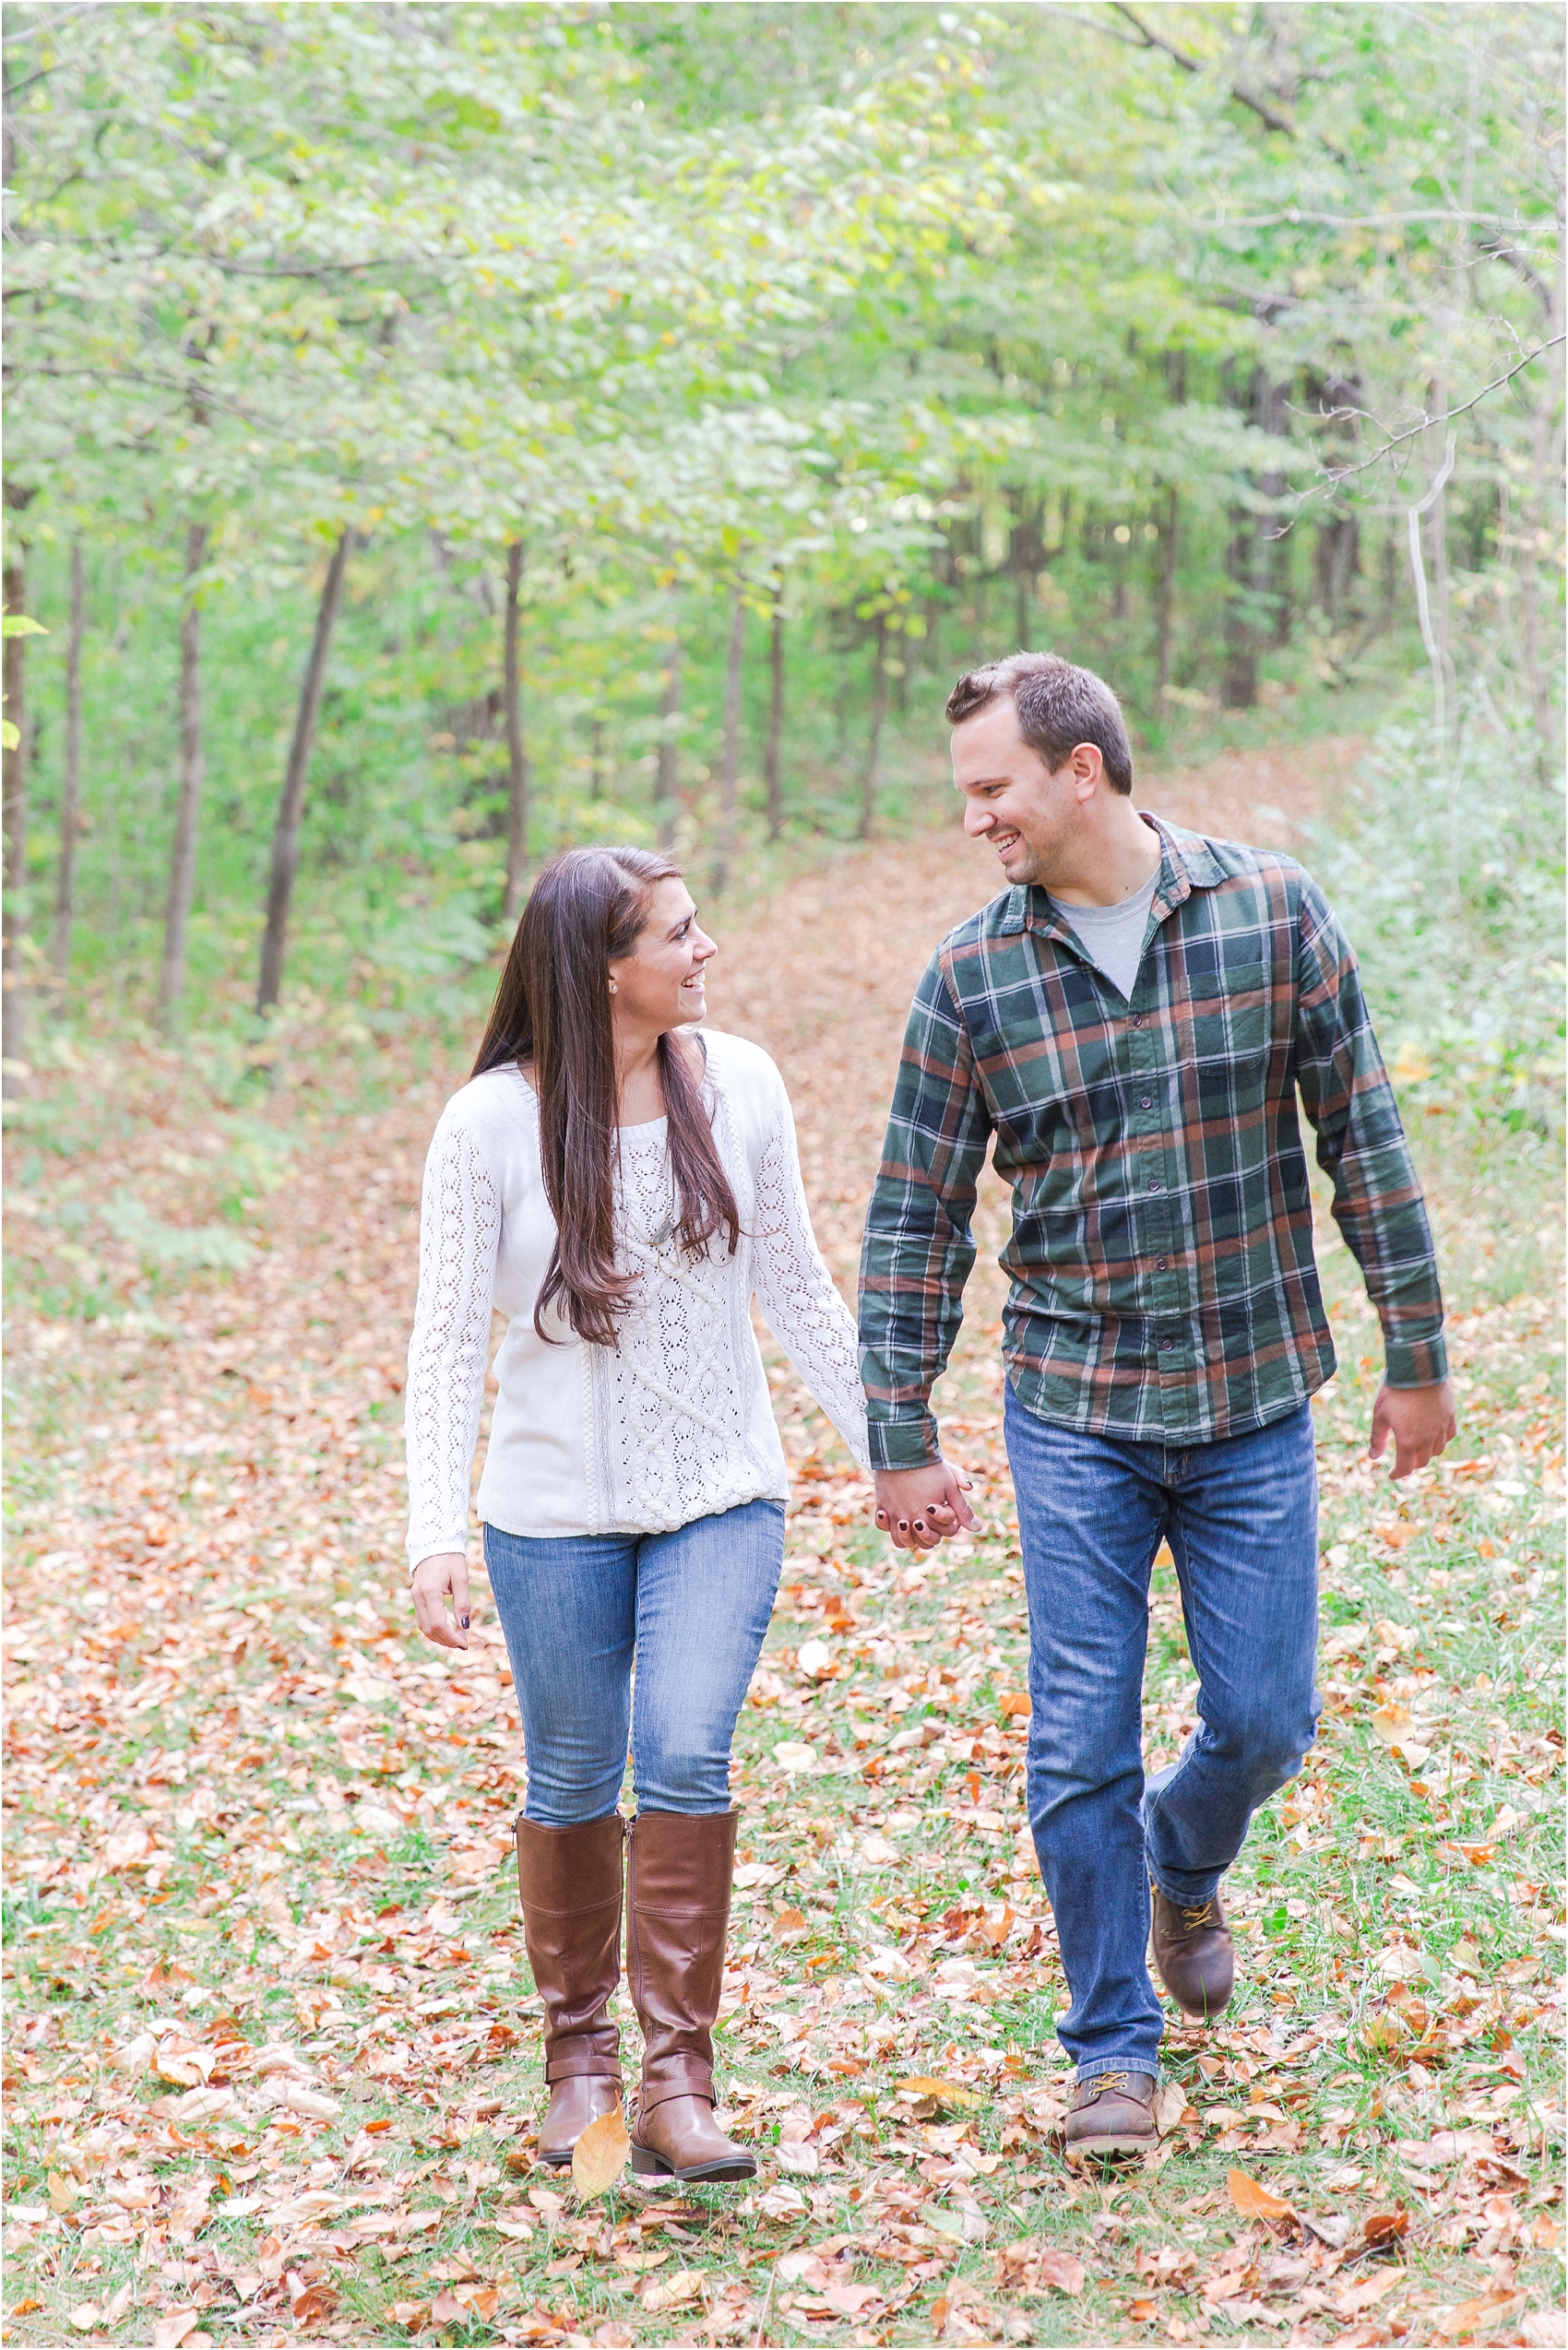 relaxed-autumn-engagement-photos-at-hudson-mills-metropark-in-dexter-mi-by-courtney-carolyn-photography_0008.jpg